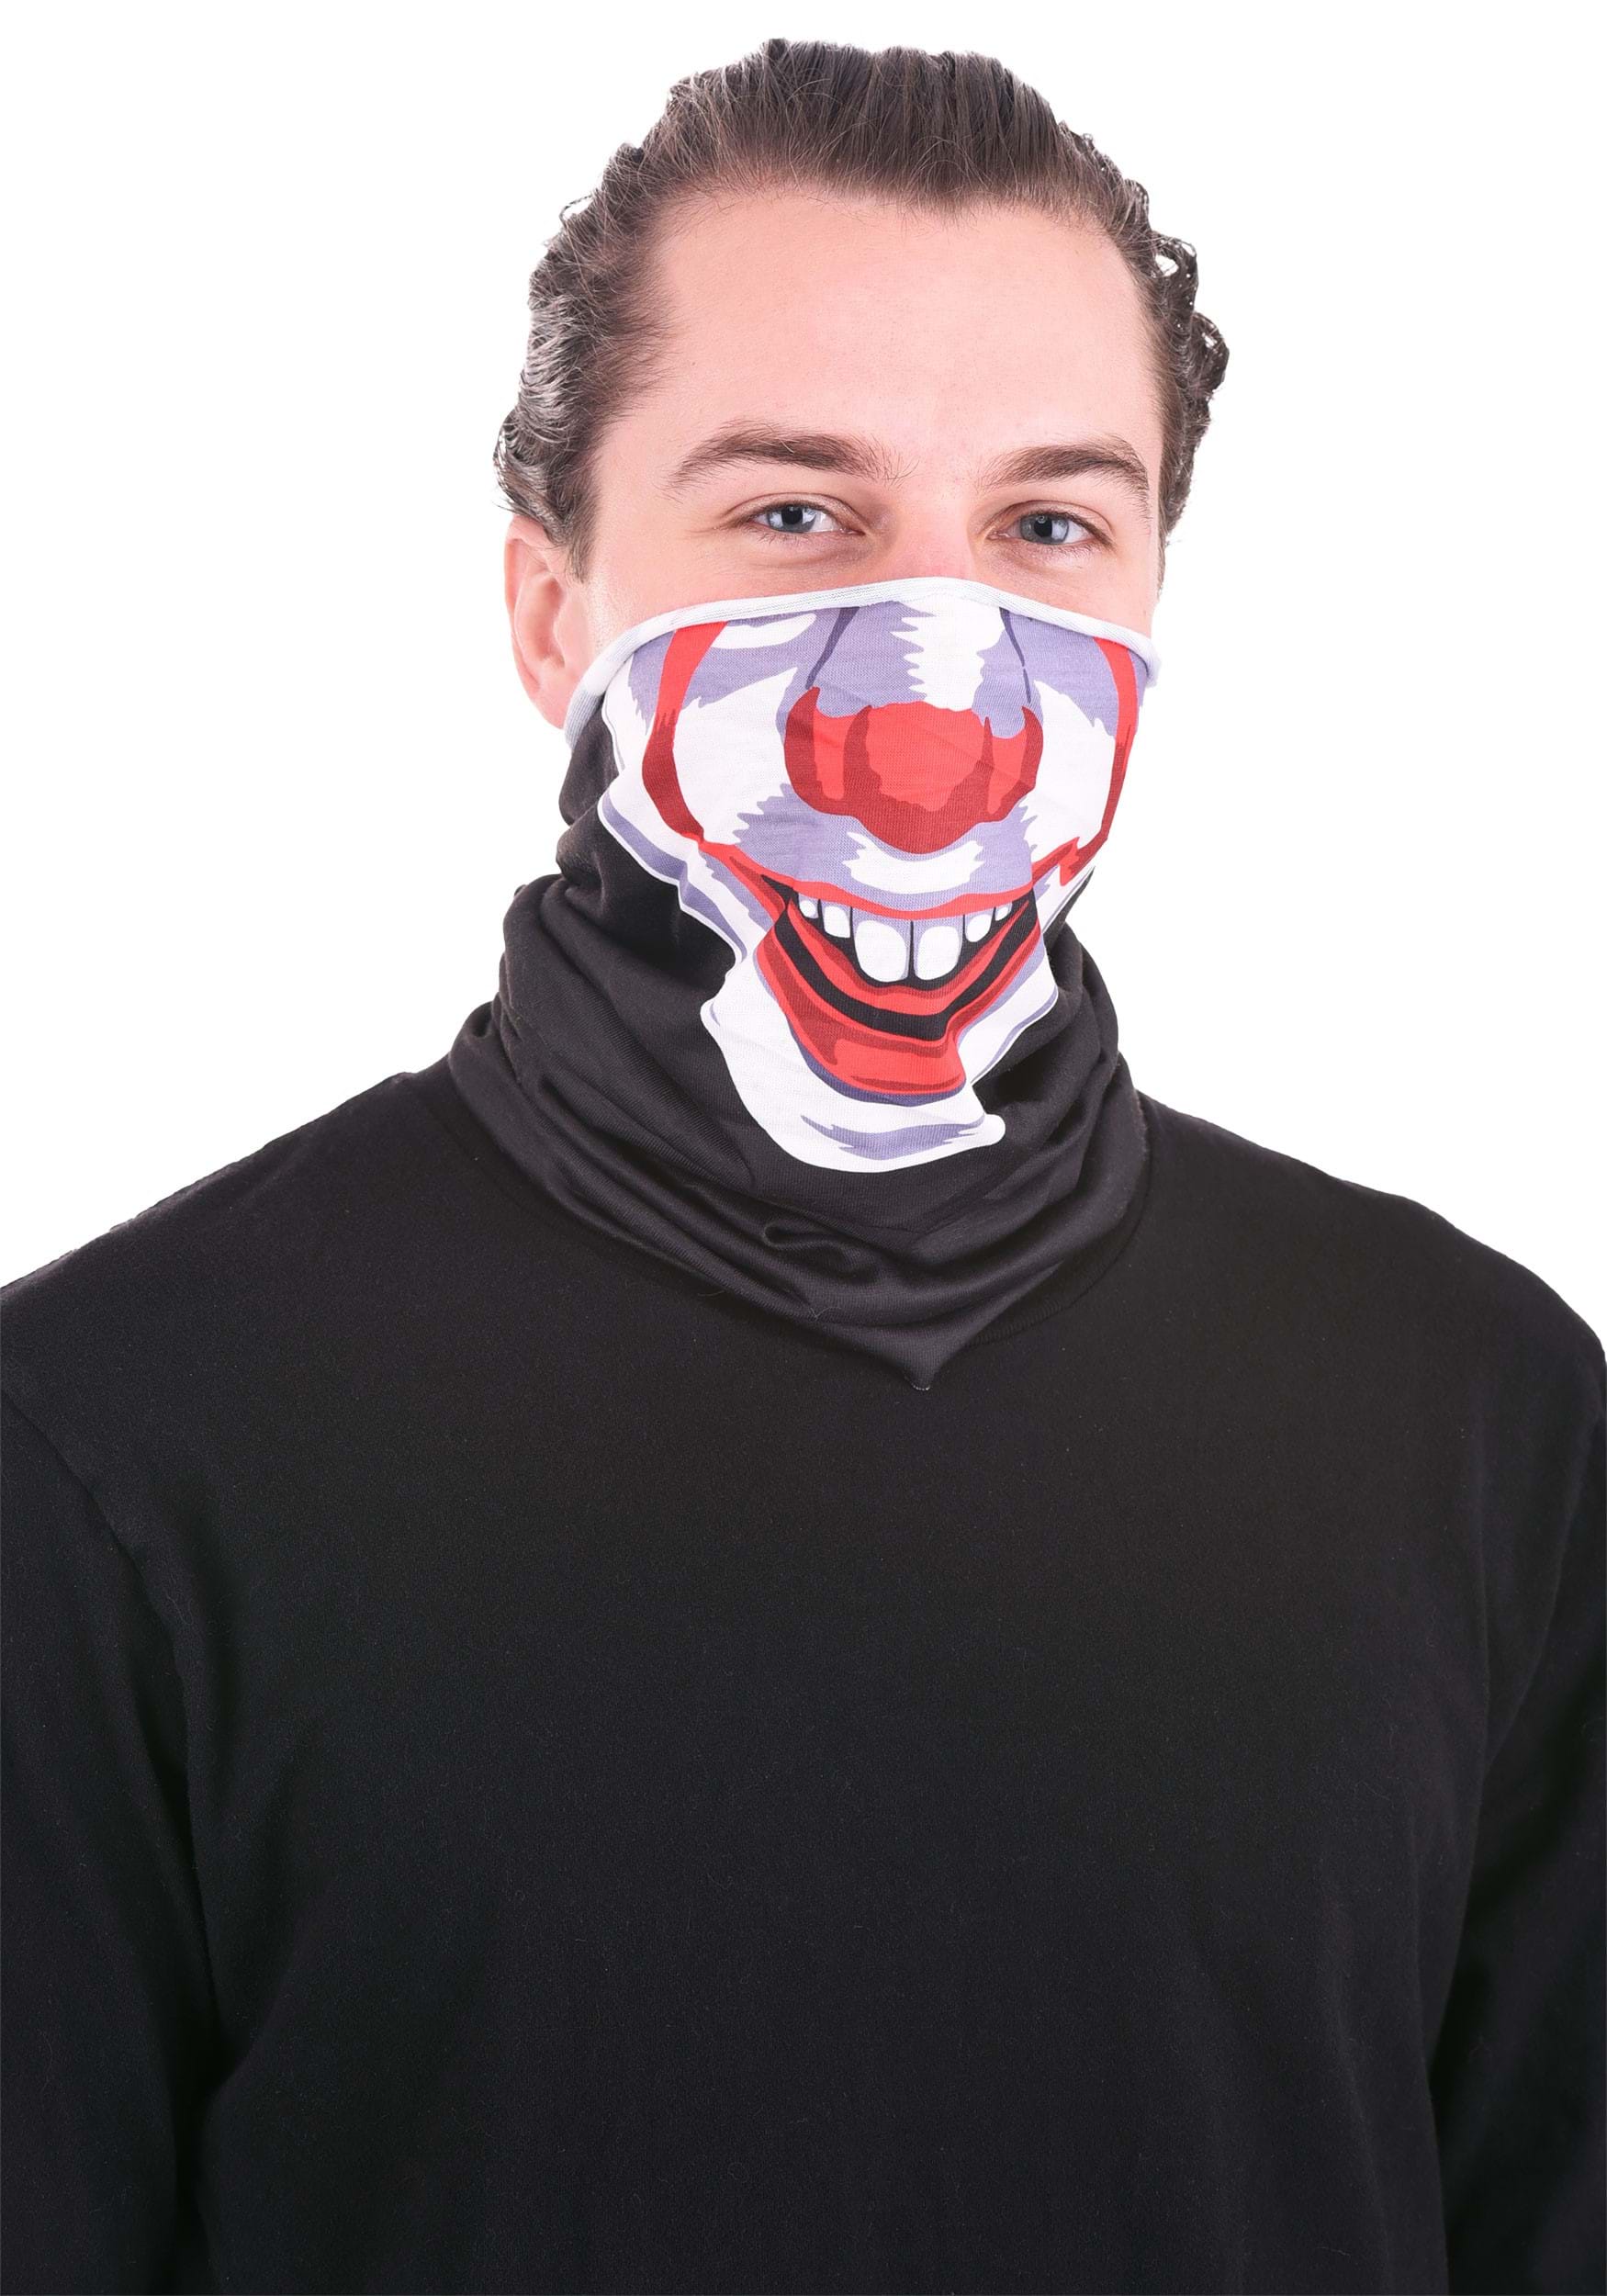 IT Penny wise Adult Neck Gaiter